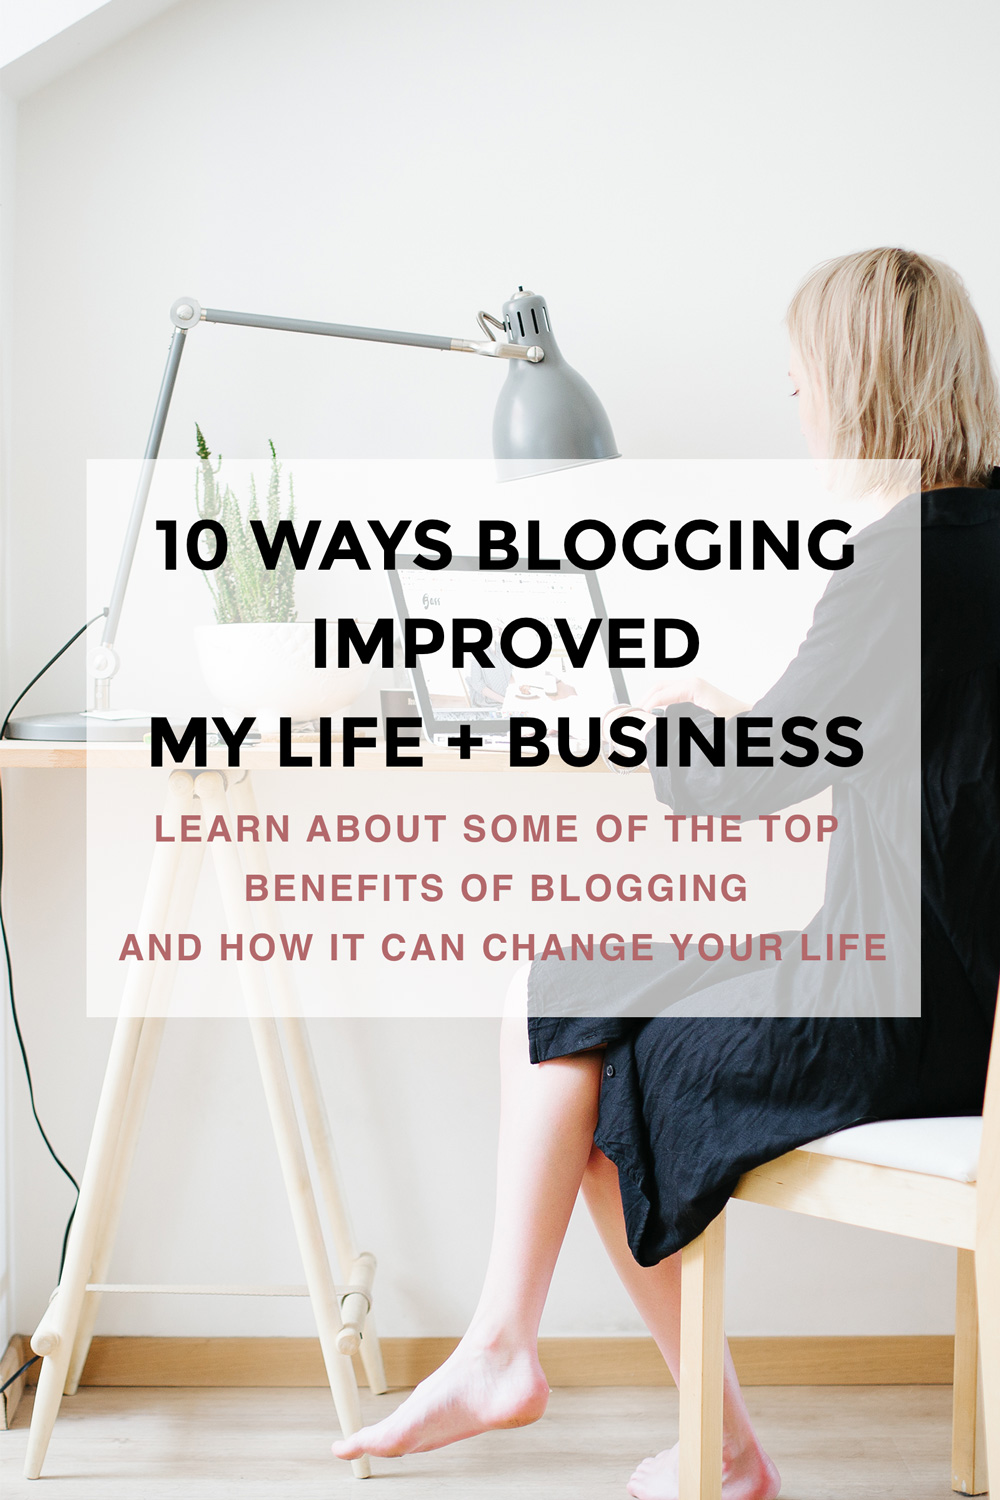 10 ways blogging improved my life + business. Click through to Learn about some of the top benefits of blogging and how it can change your life.